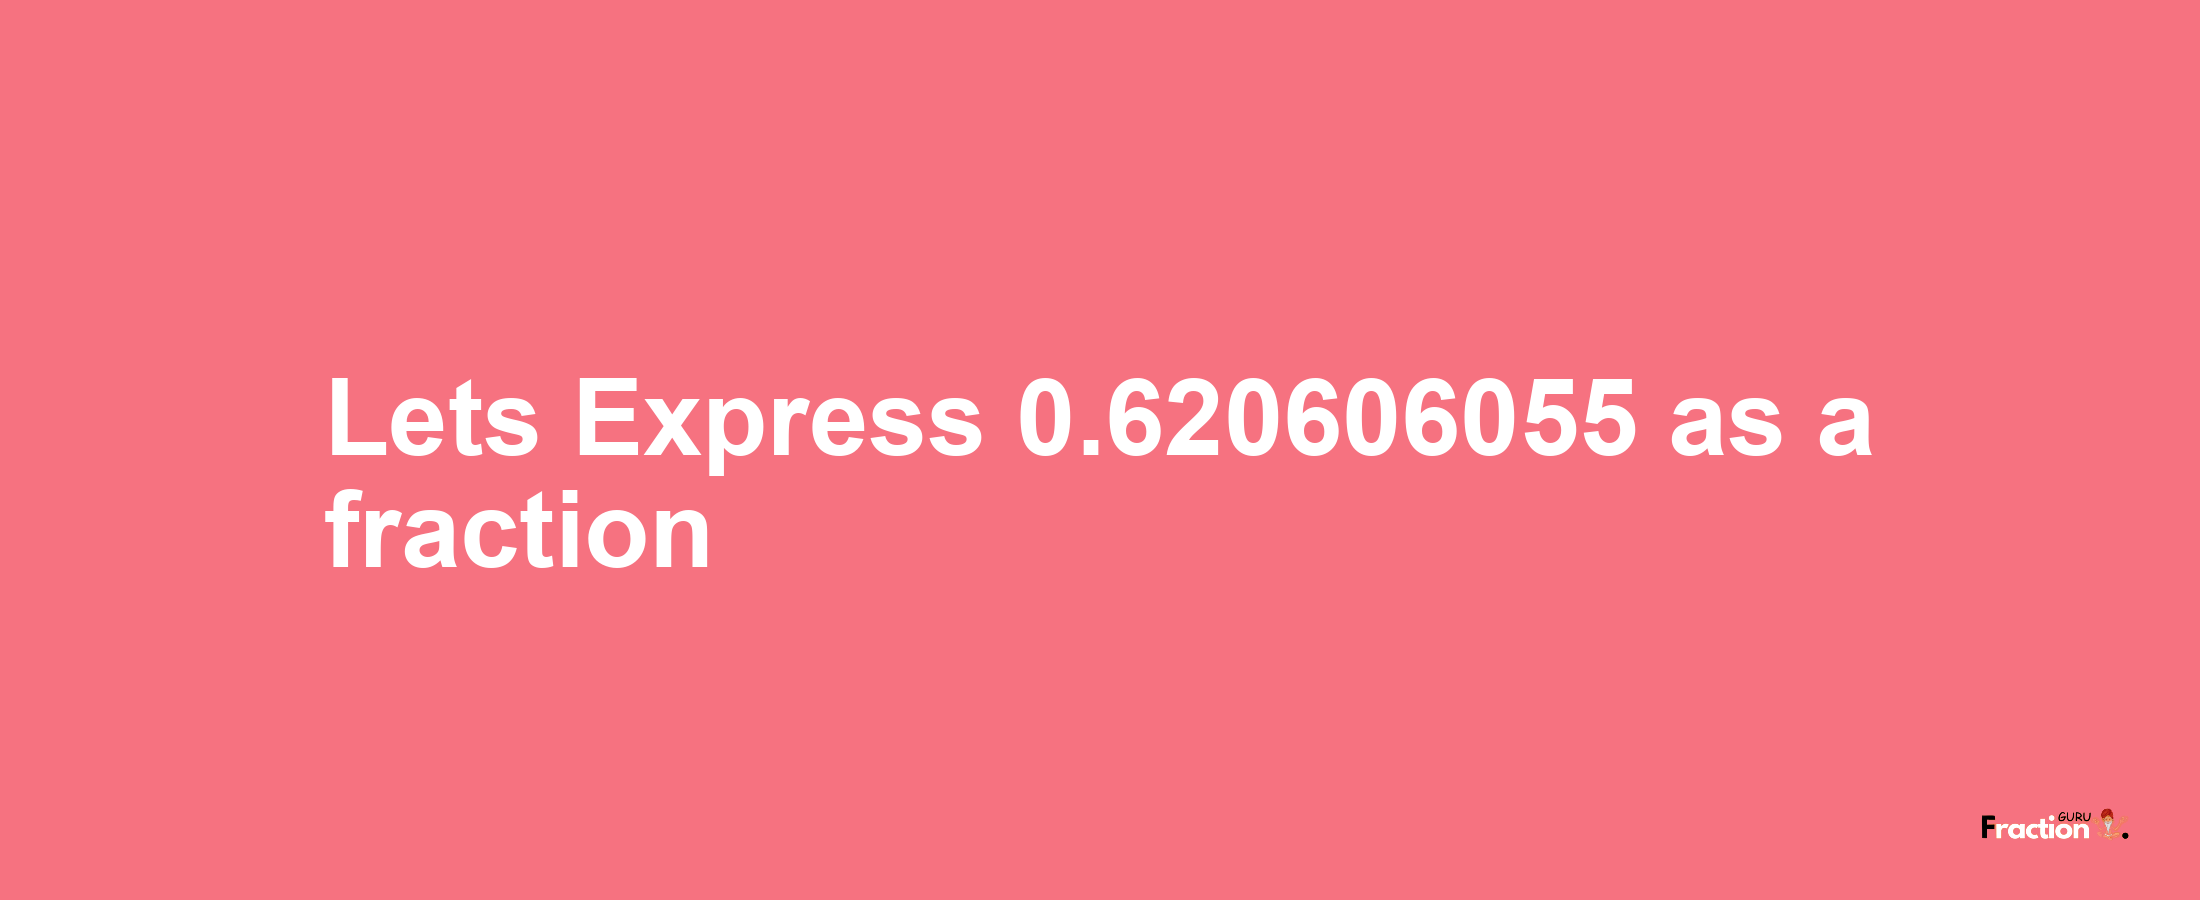 Lets Express 0.620606055 as afraction